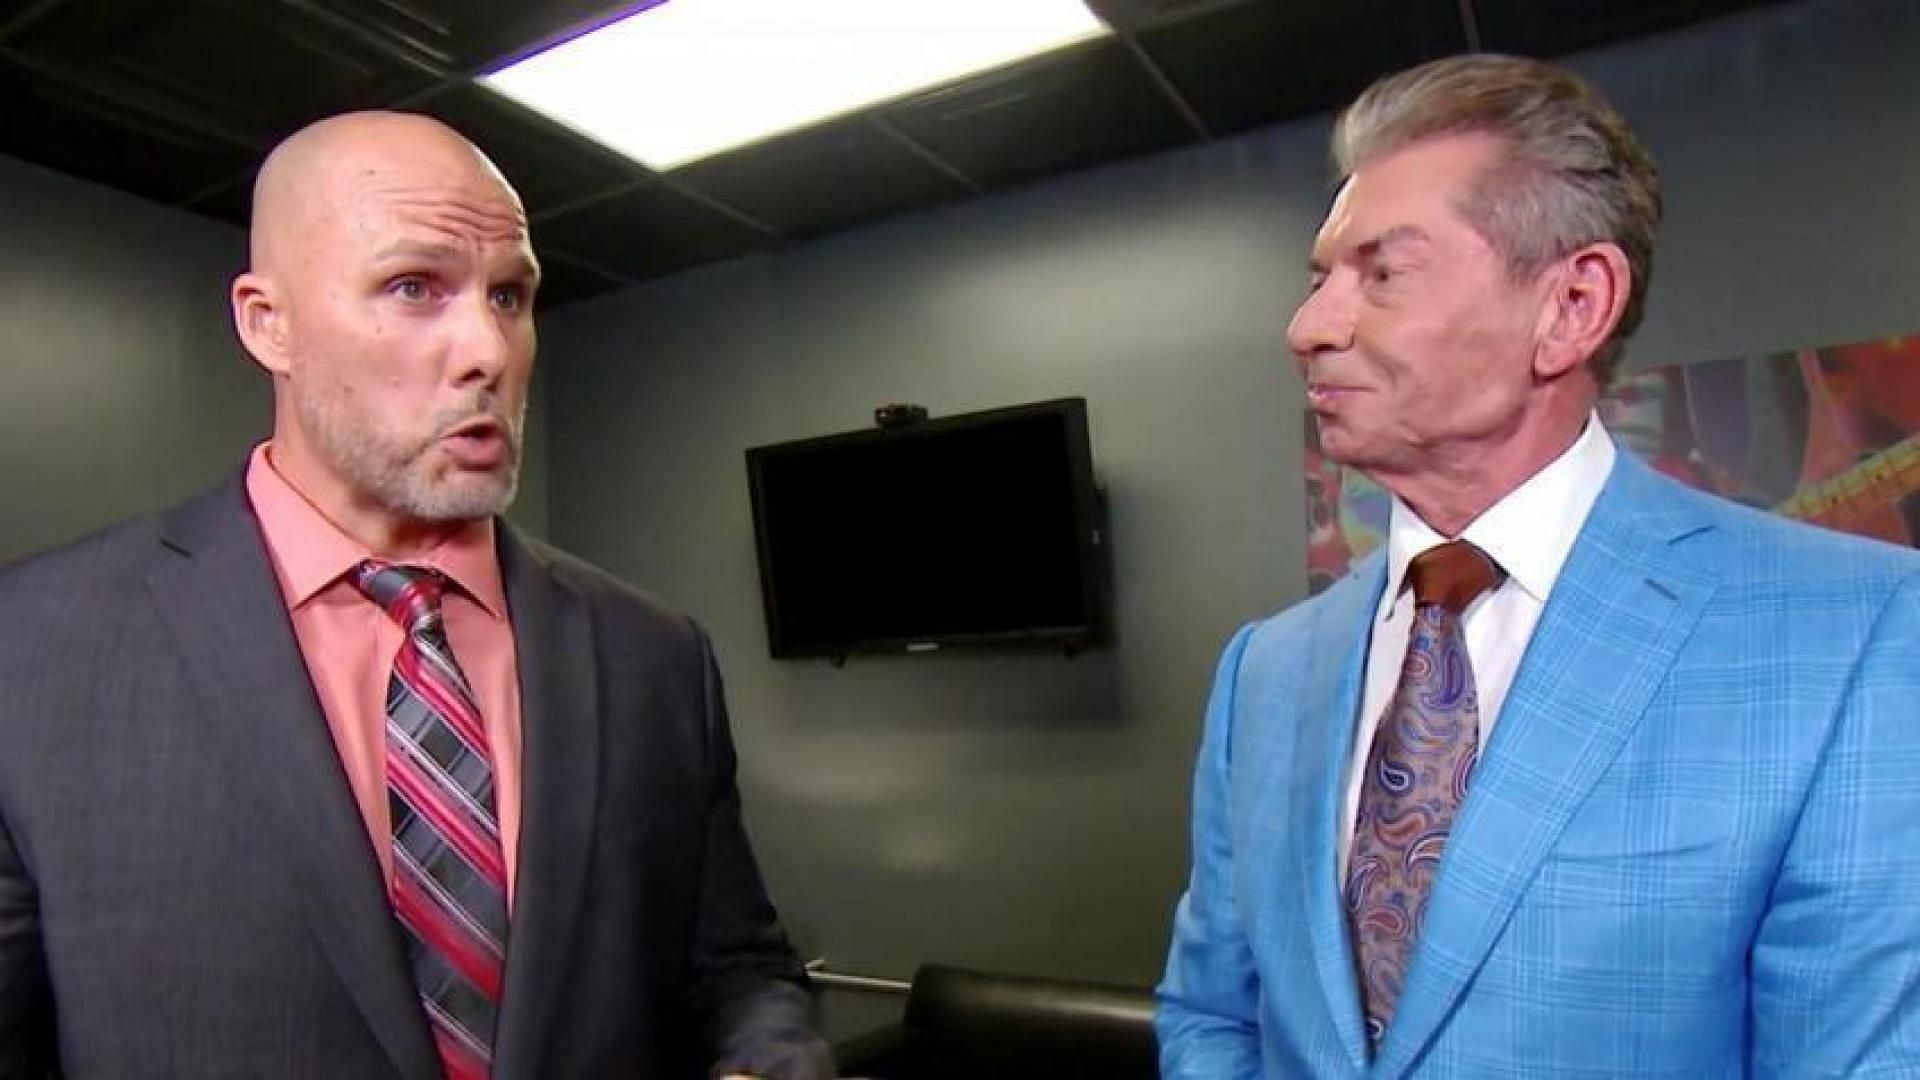 WWE Official Adam Pearce and Chairman Vince McMahon